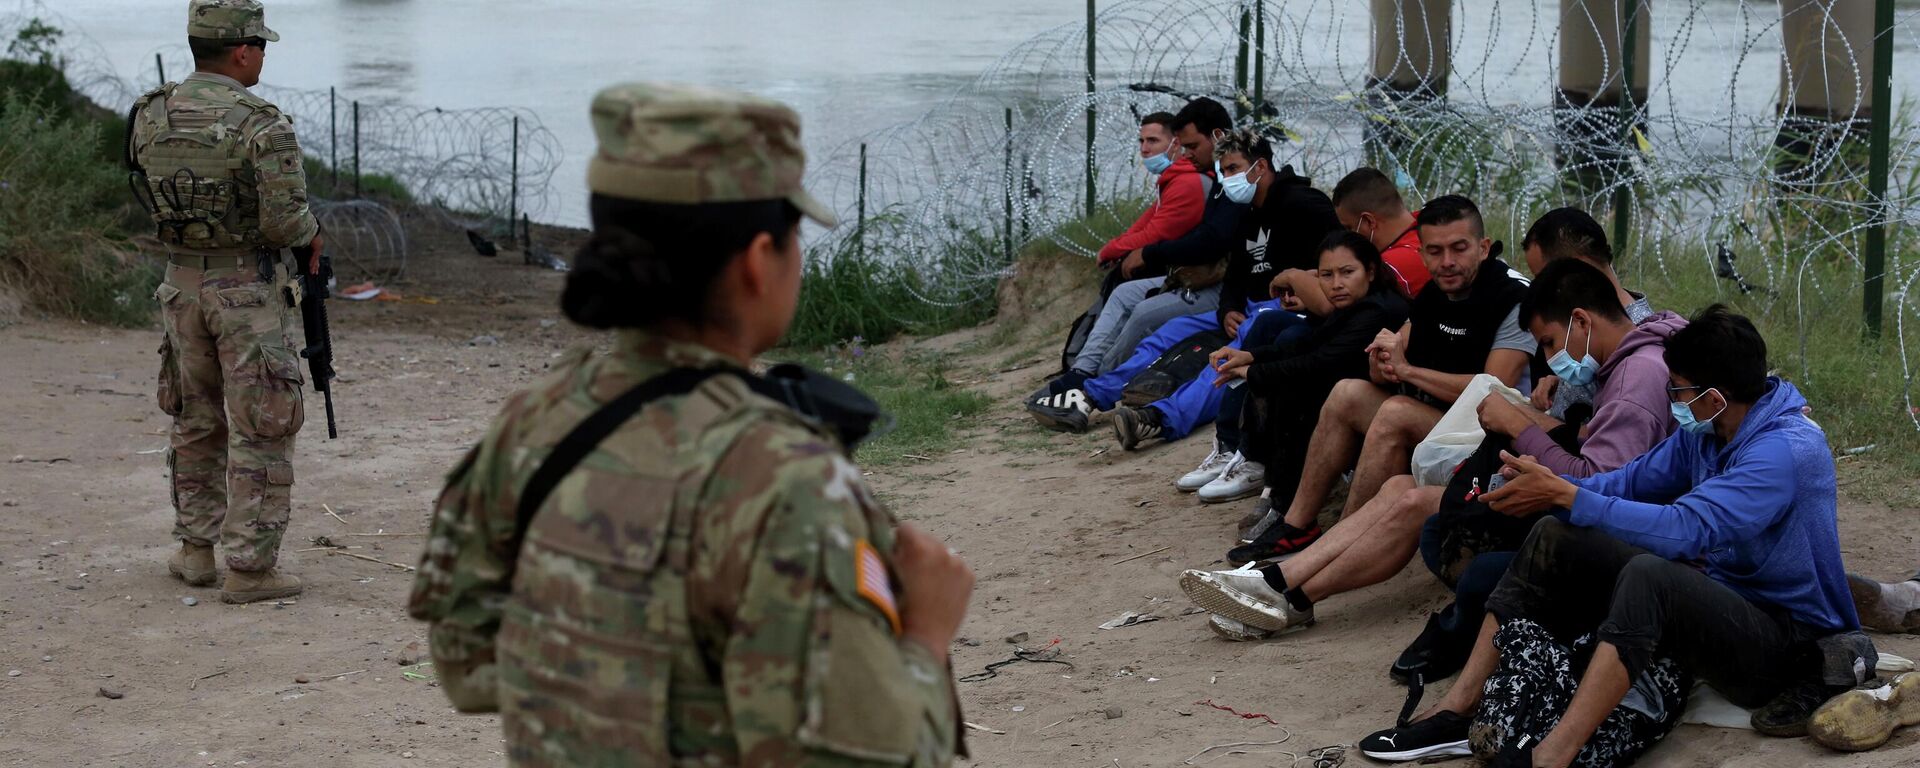 Migrants who had crossed the Rio Grande river into the U.S. are under custody of National Guard members as they await the arrival of U.S. Border Patrol agents in Eagle Pass, Texas, Friday, May 20, 2022 - Sputnik International, 1920, 31.10.2023